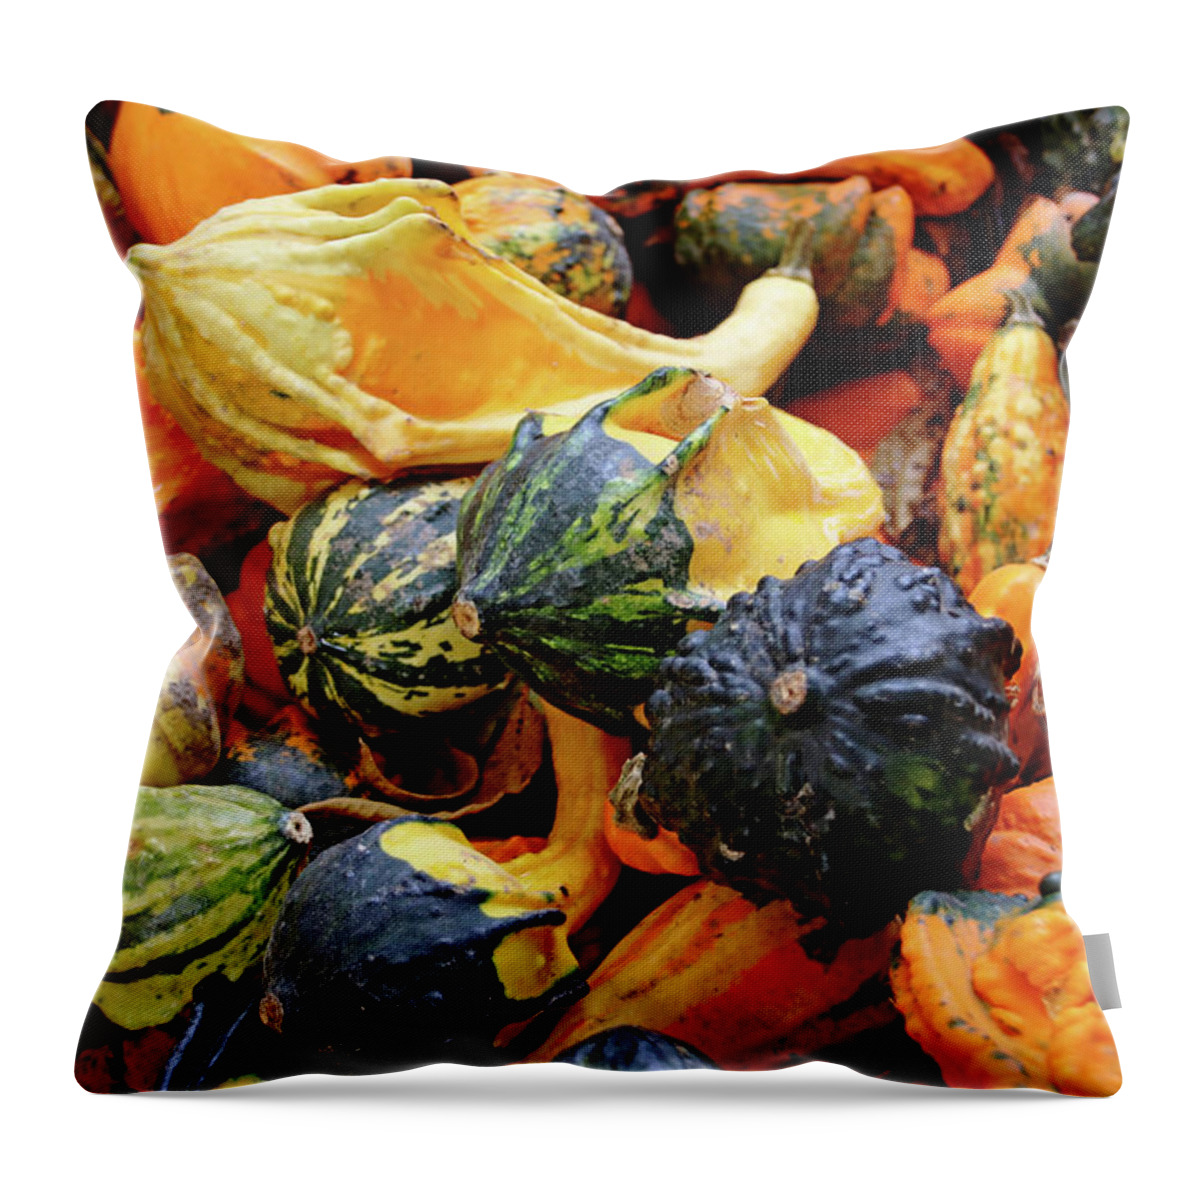 Gourds Throw Pillow featuring the photograph Gourds by Debbie Oppermann